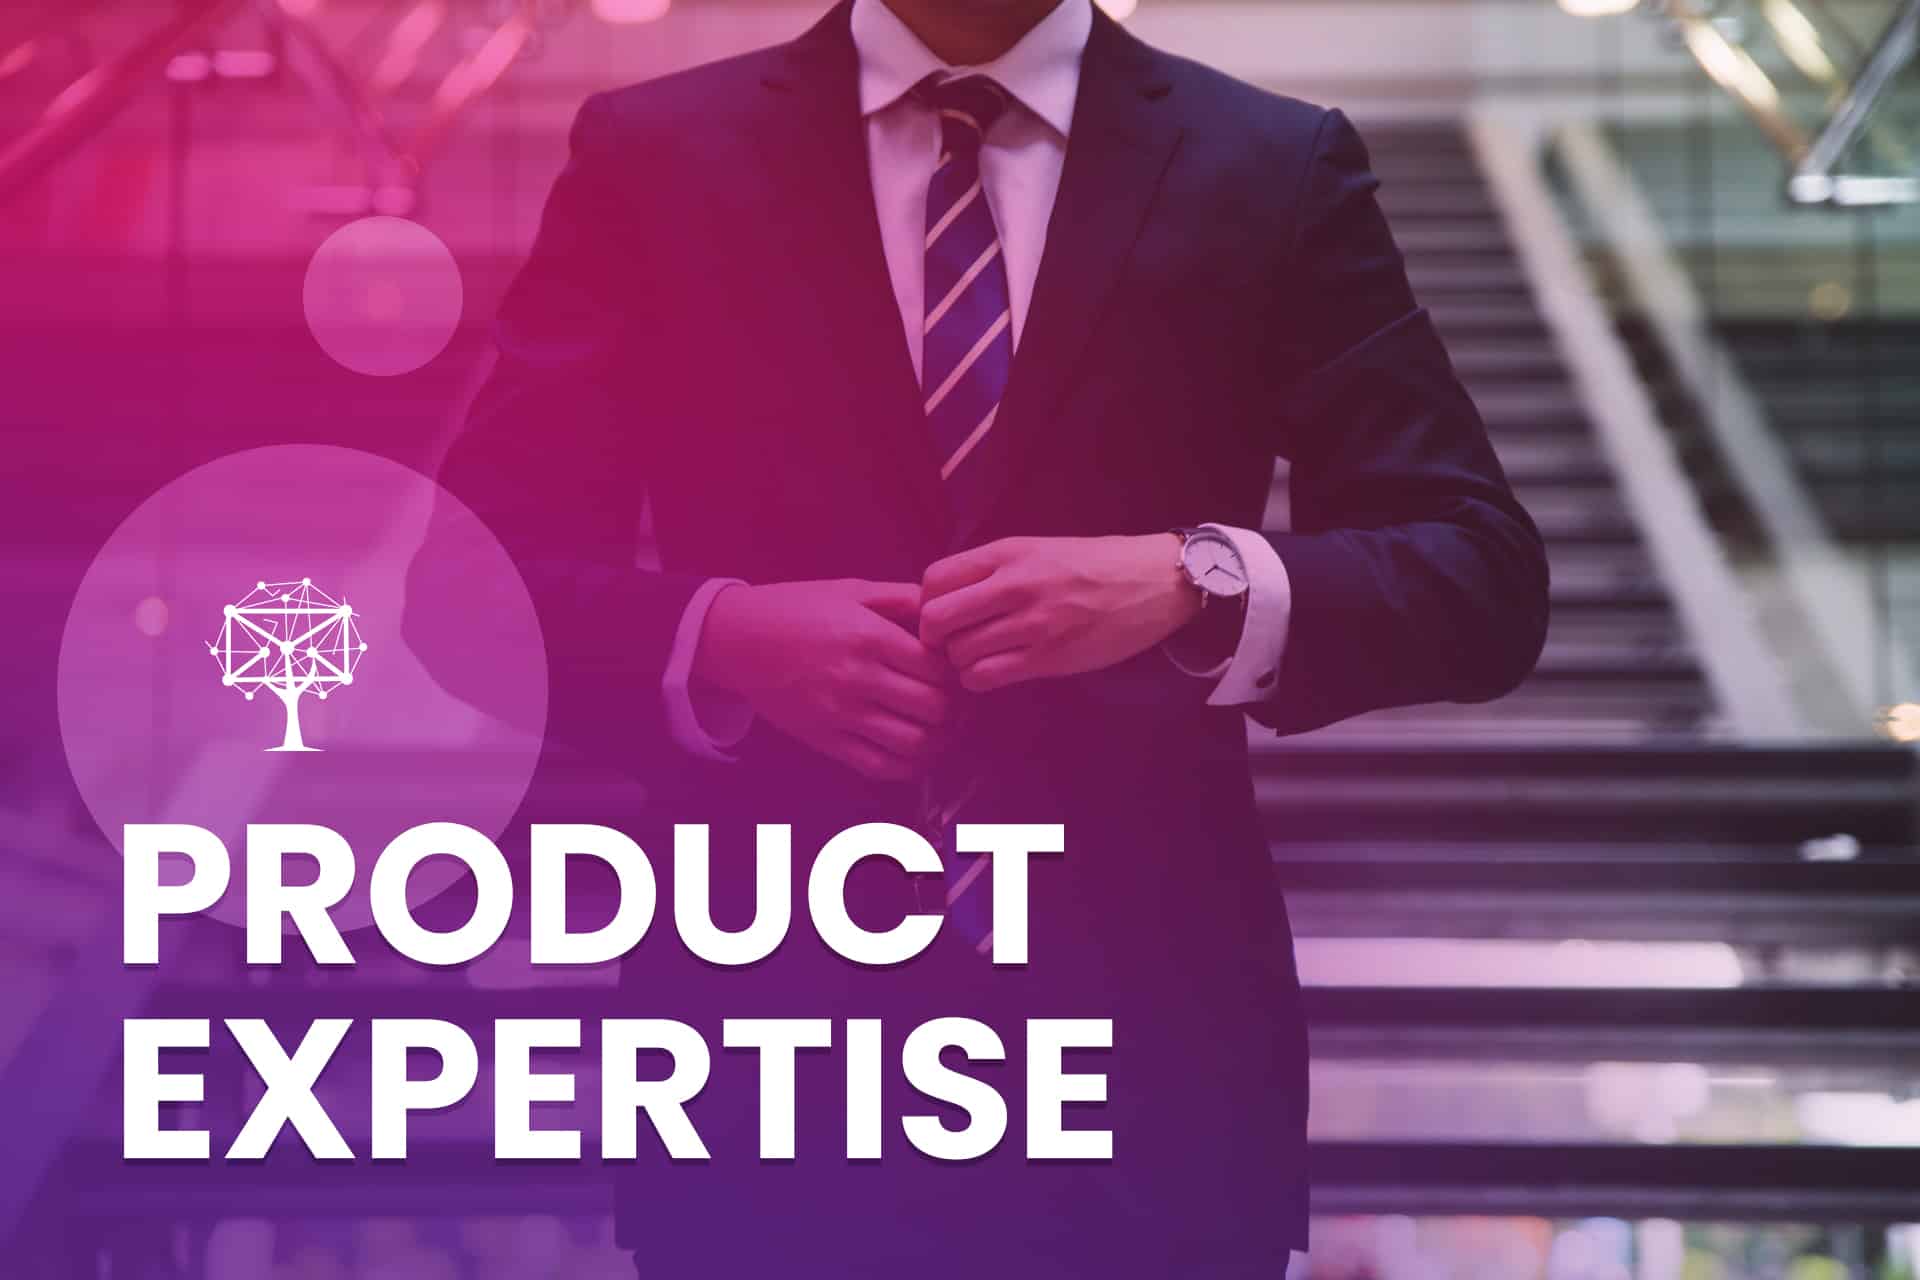 Product Expertise is a key customer service skill